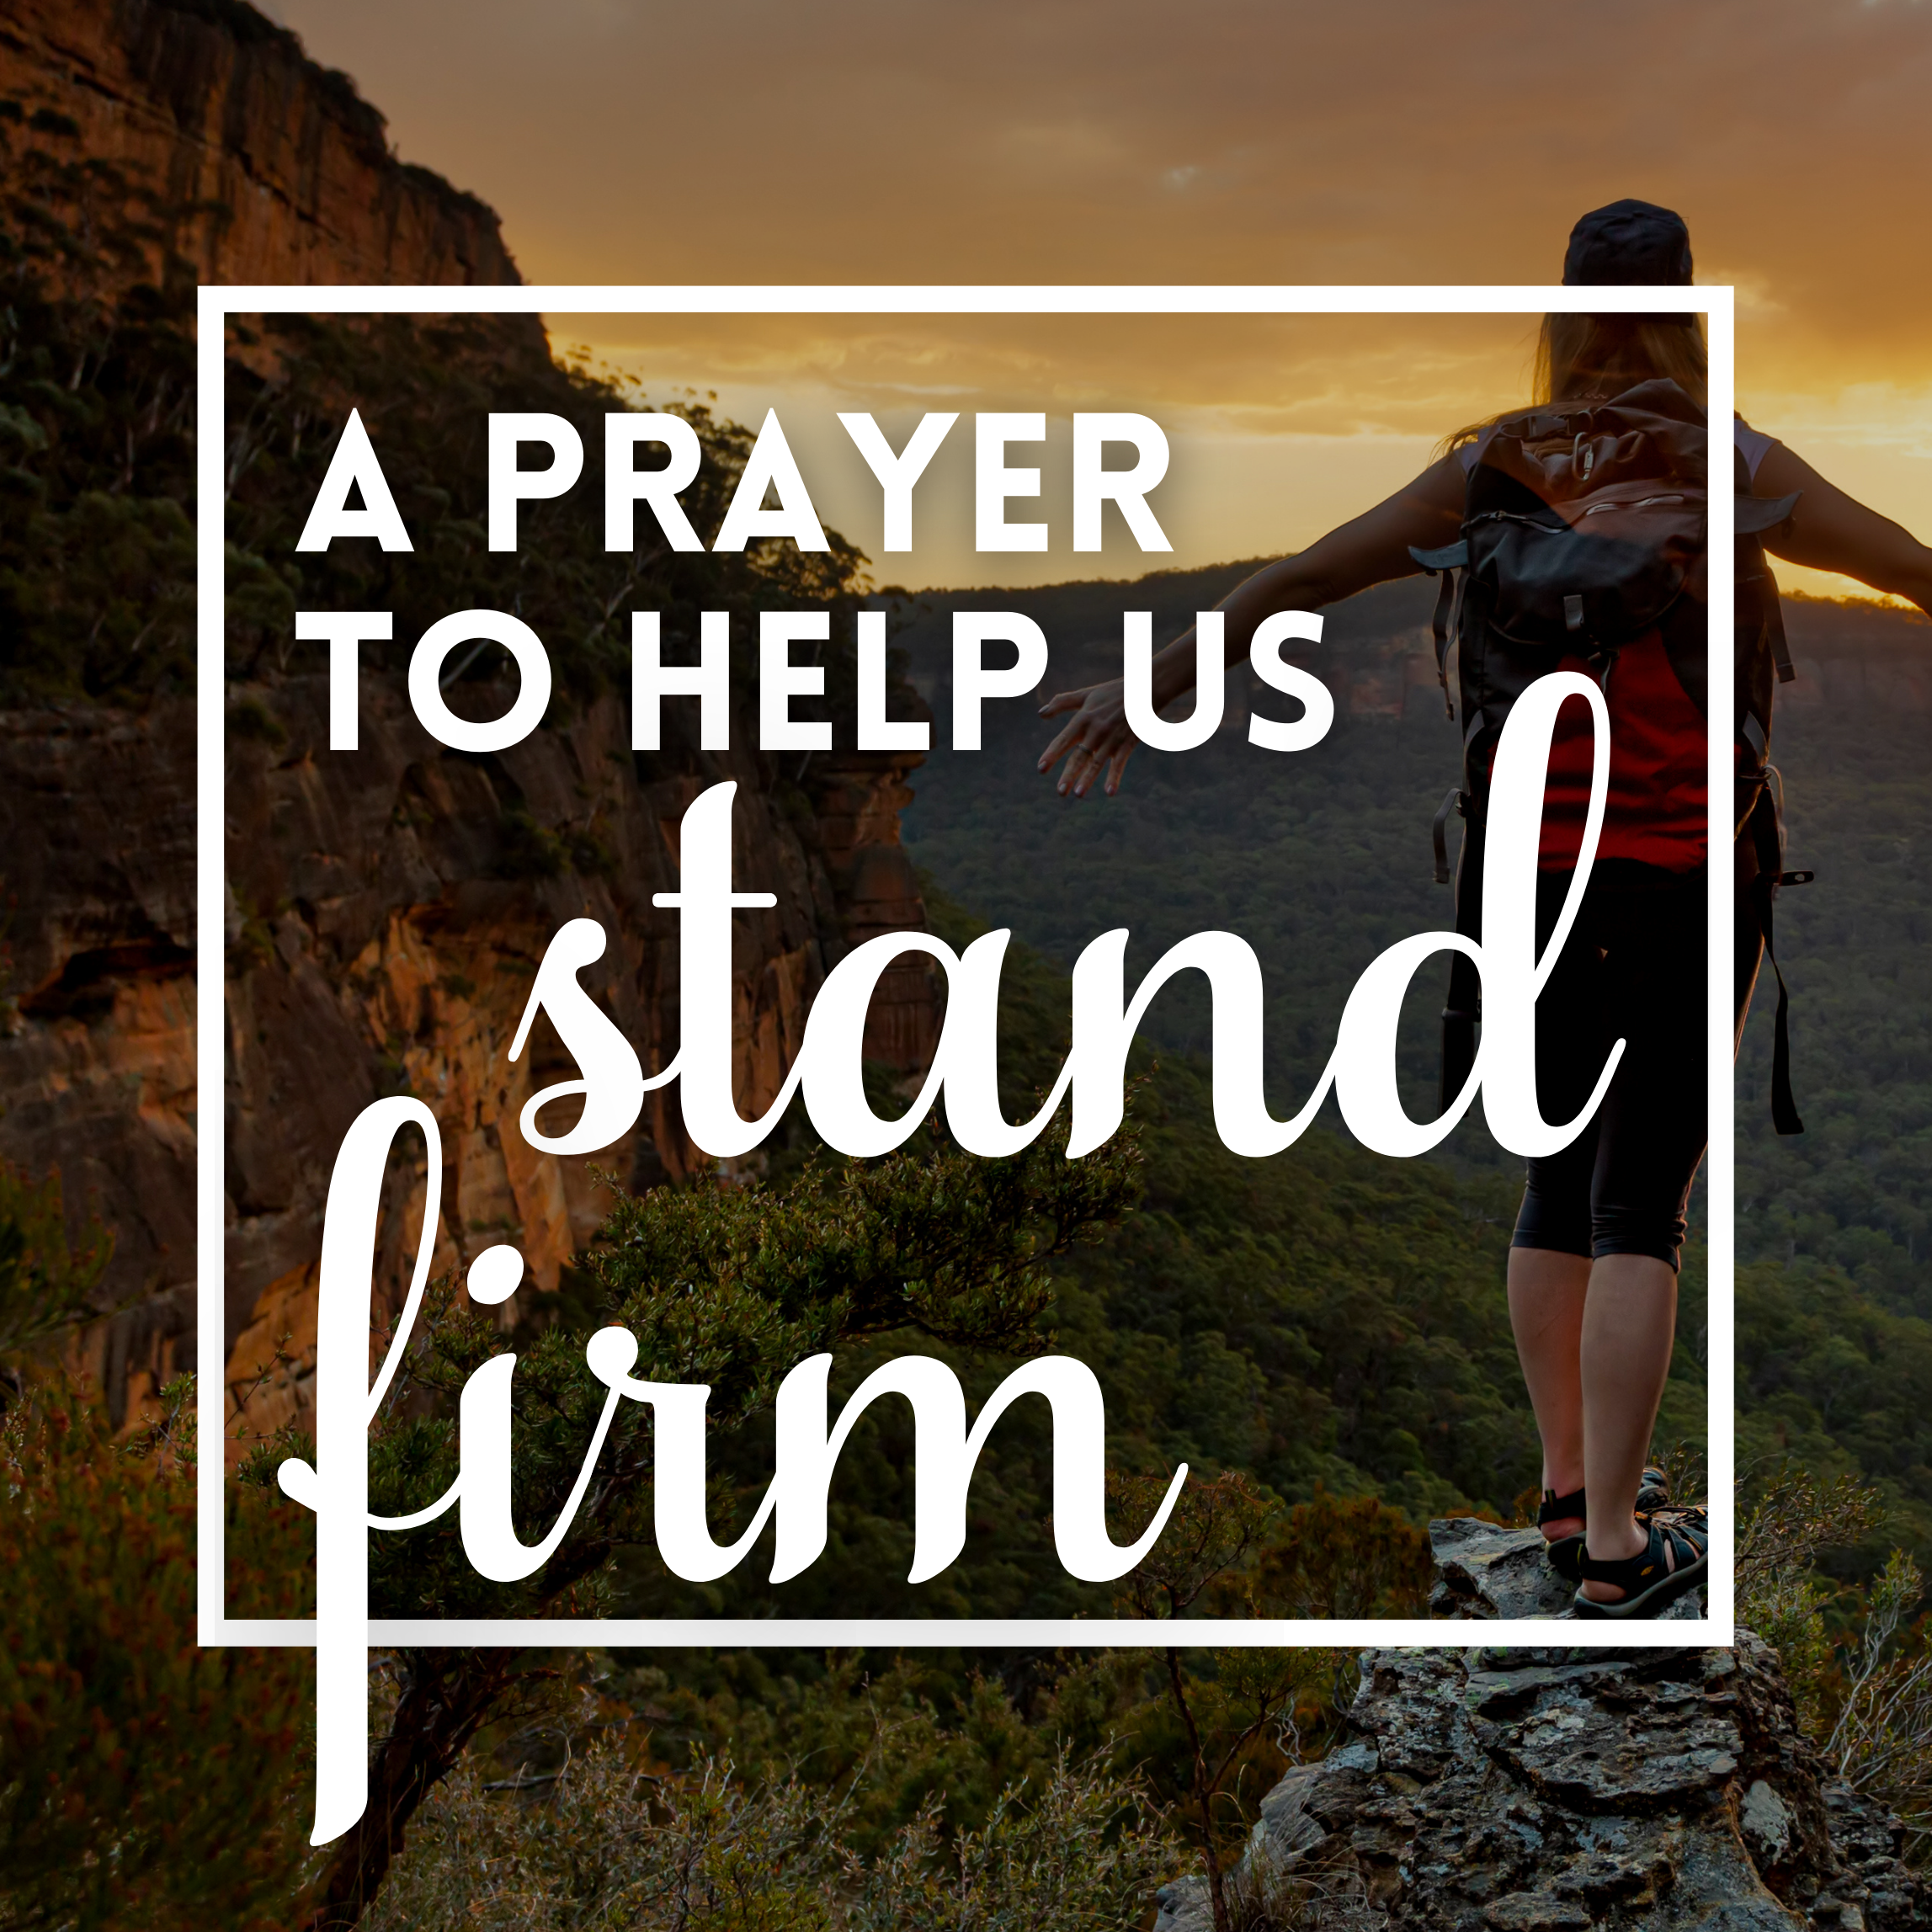 A Prayer to Help Us Stand Firm